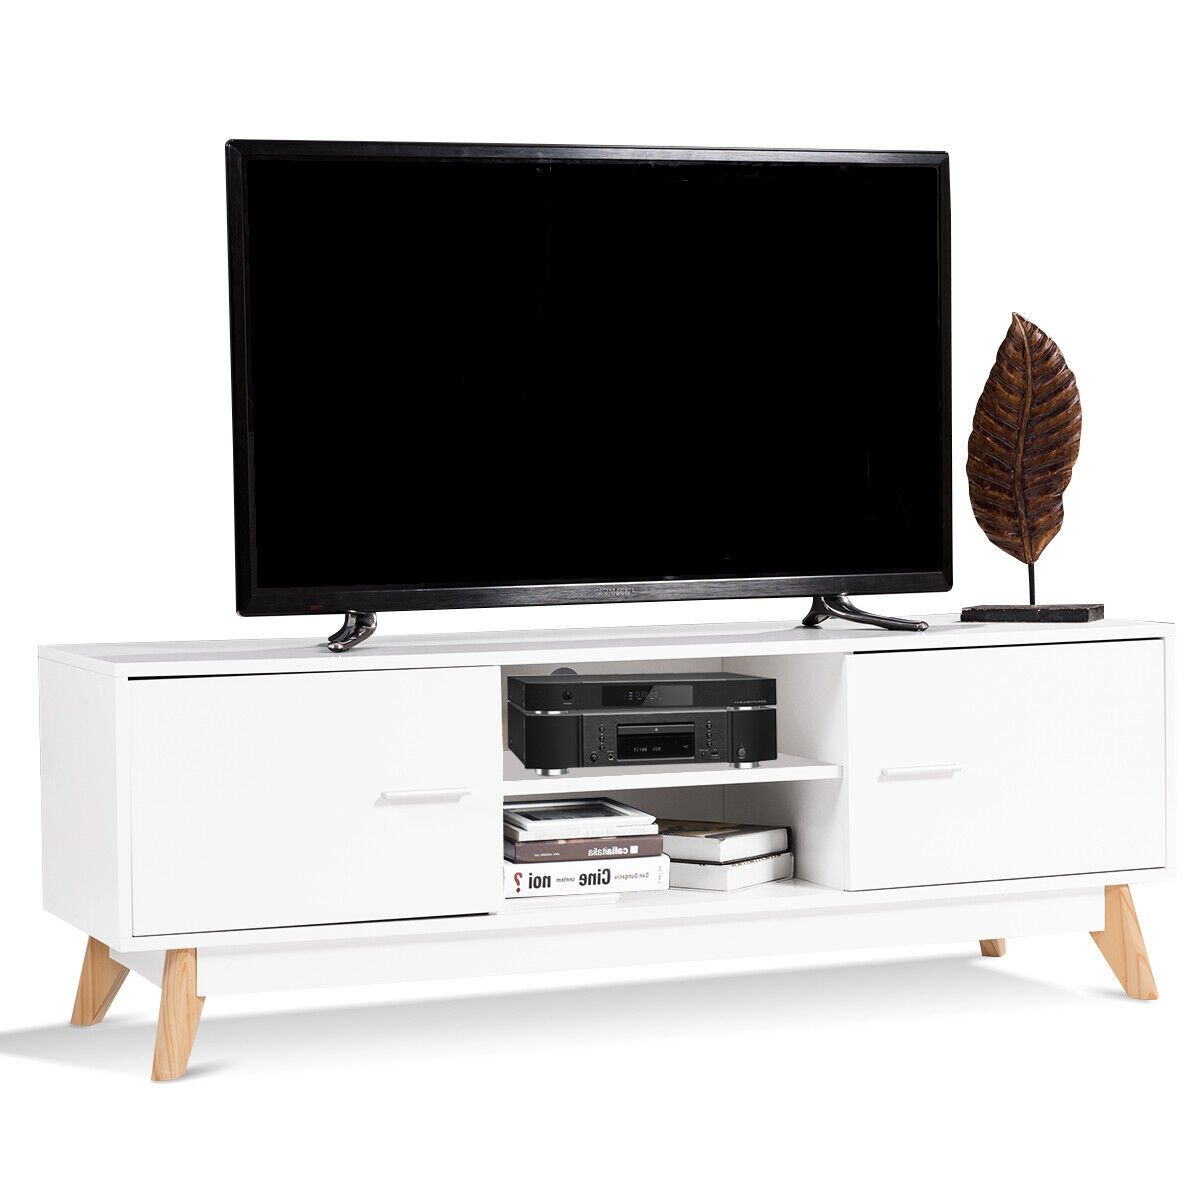 Modern Wooden TV Stand with Double Door and 2 Storage Shelves for TVs up to 60 Inches